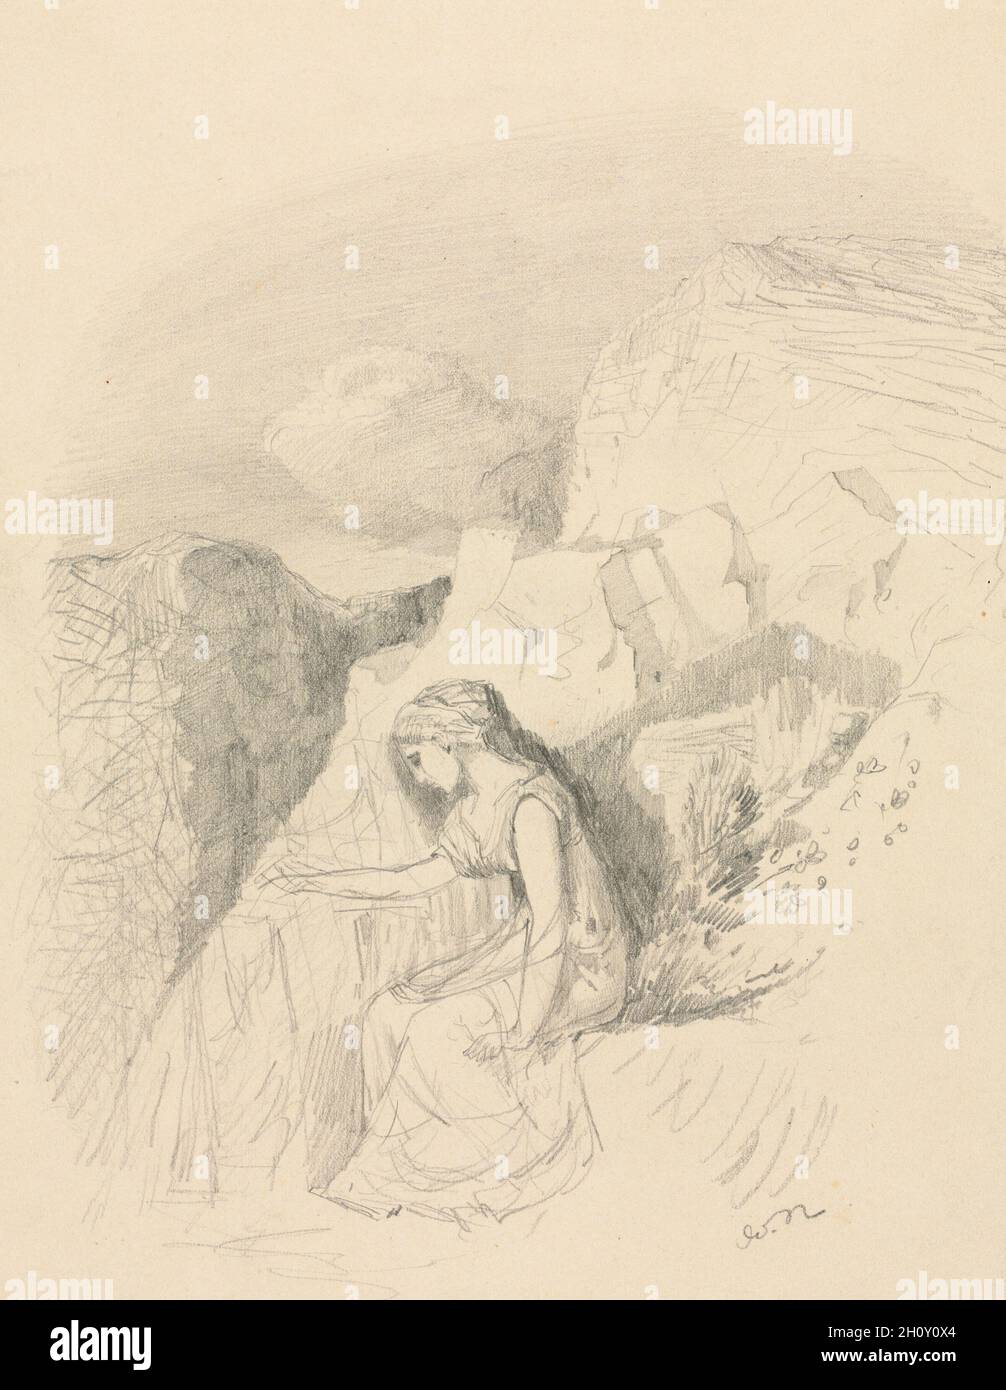 Melancholy, c. 1868. Odilon Redon (French, 1840-1916). Graphite; sheet: 32.1 x 22 cm (12 5/8 x 8 11/16 in.).  Odilon Redon grew up near the massive Pyrénées mountains in southern France and their image recurred throughout his work. In a series of drawings made during the 1870s, Redon used the craggy surface and infinite reach of his native landscape to evoke a sense of solitude and isolation. The woman seen here, for example, leans forward and casts her eyes downward as if in resignation. Stock Photo